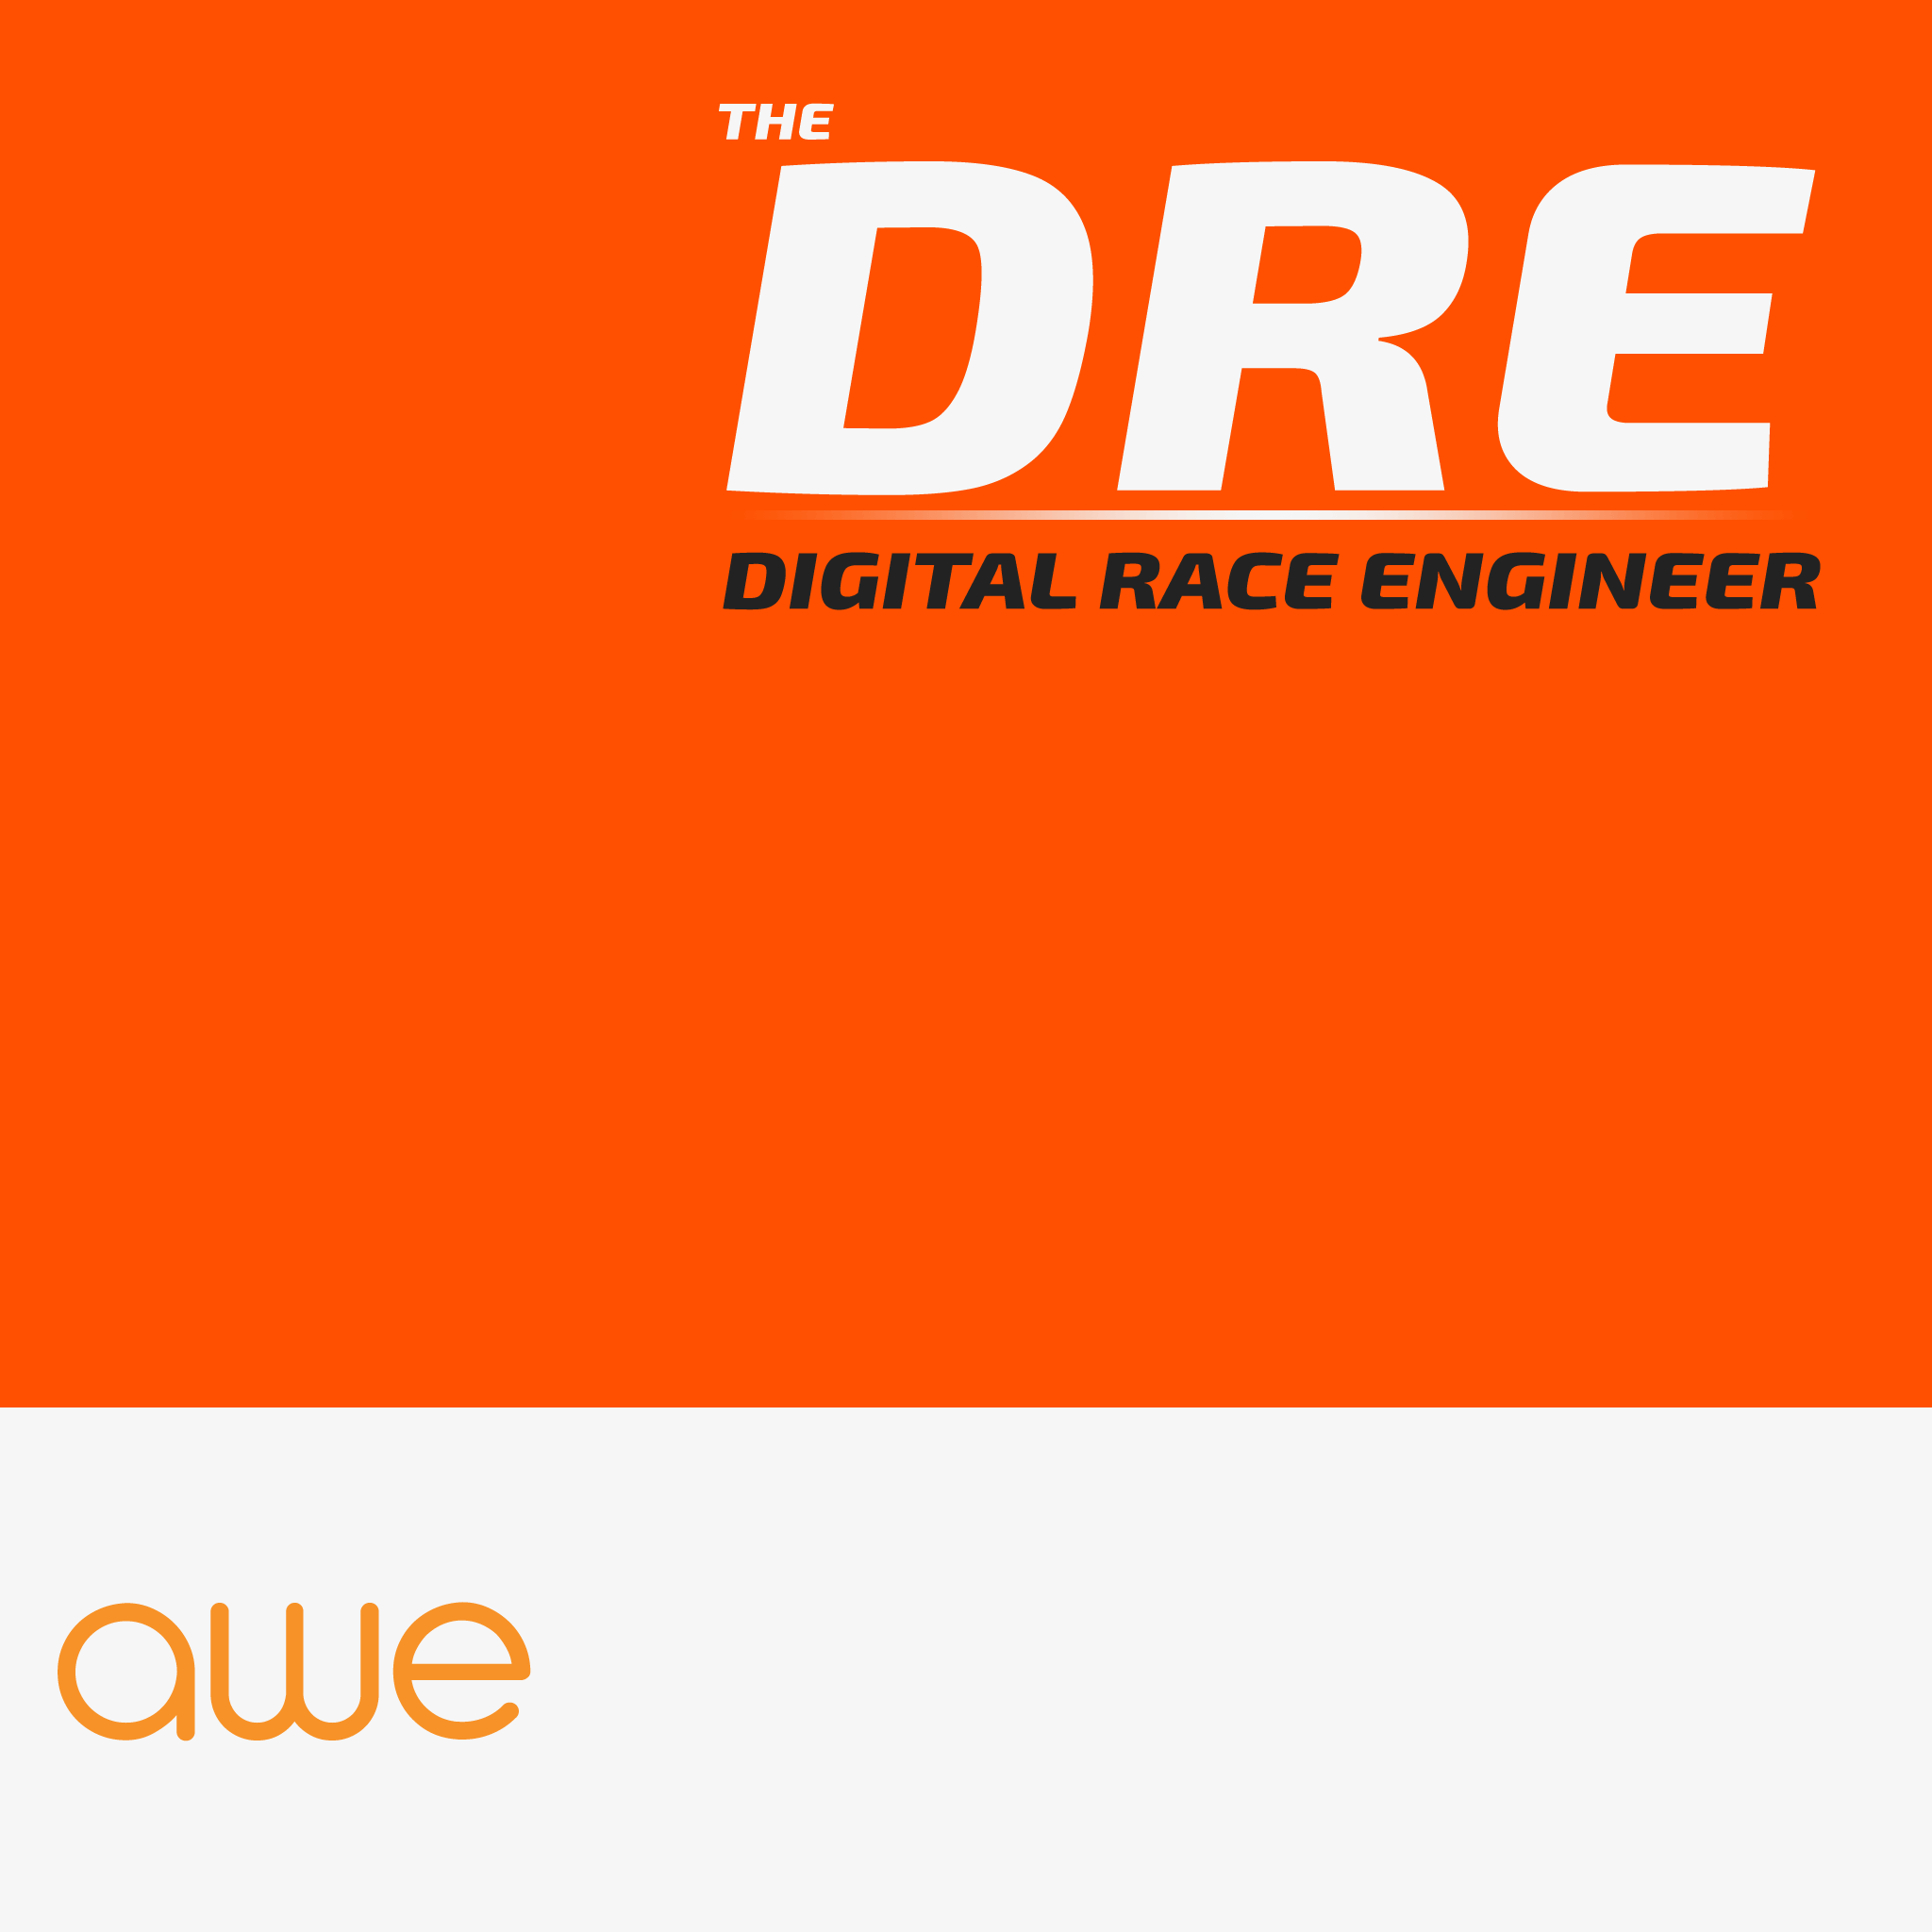 Dre Logo - The Digital Race Engineer - Voice Attack plugin for iRacing - awe